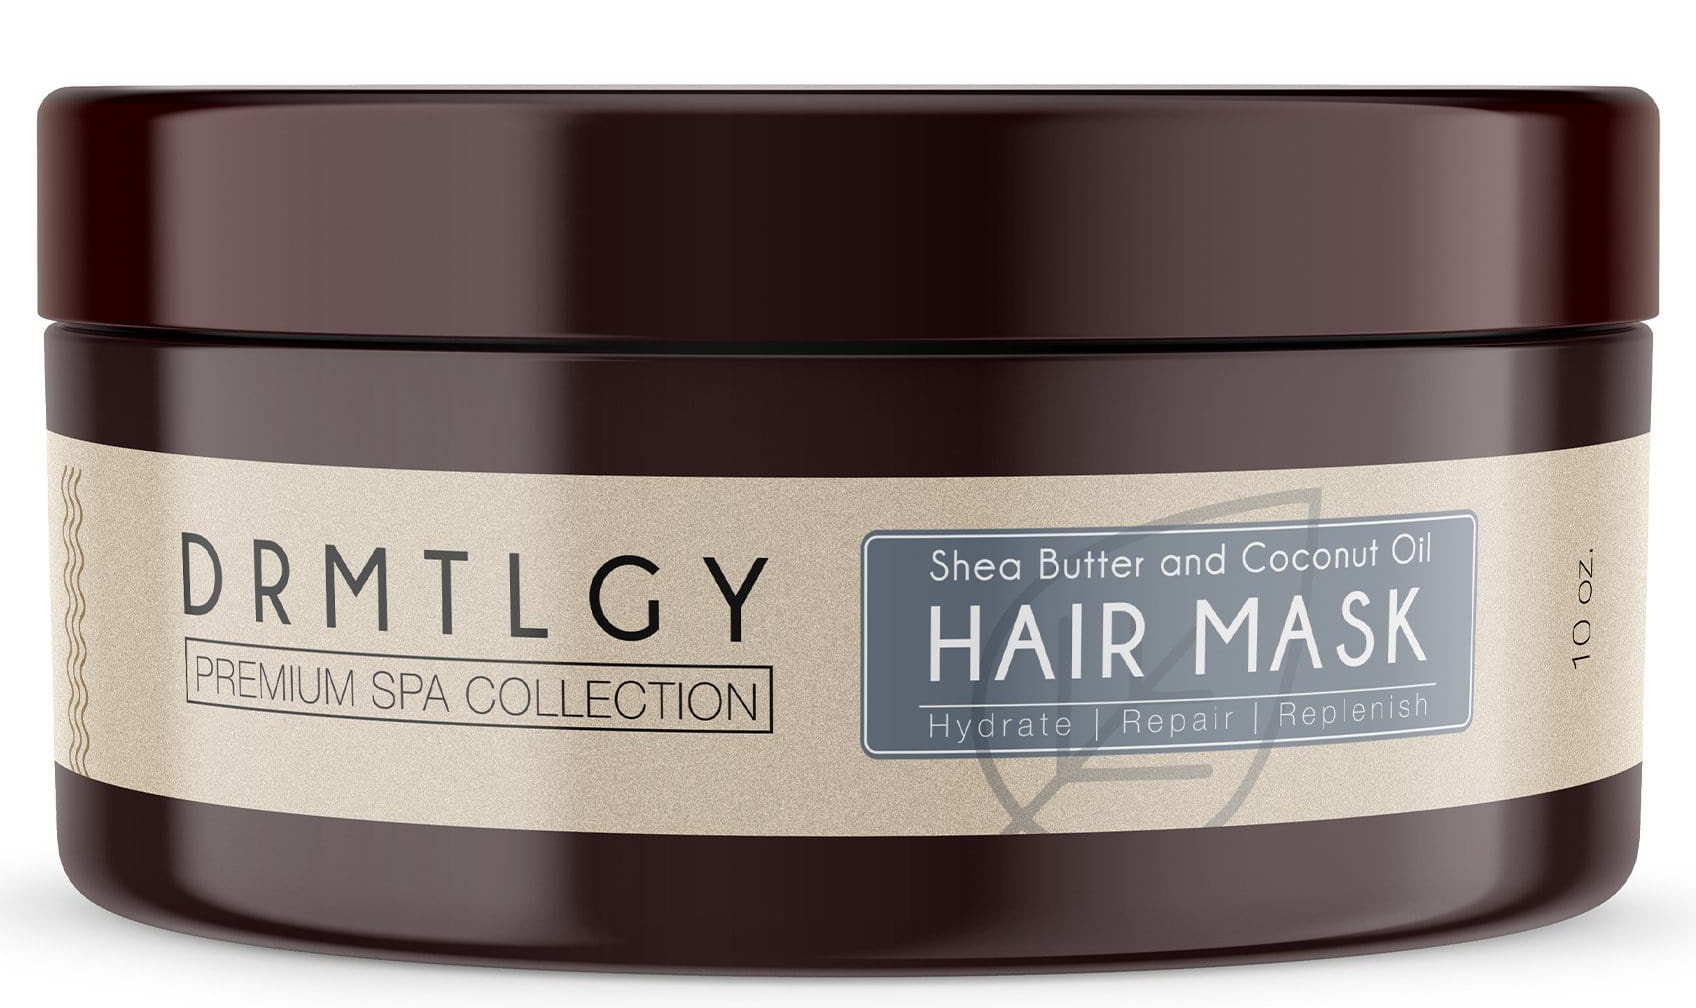 DRMTLGY Shea Butter and Coconut Oil Hair Mask